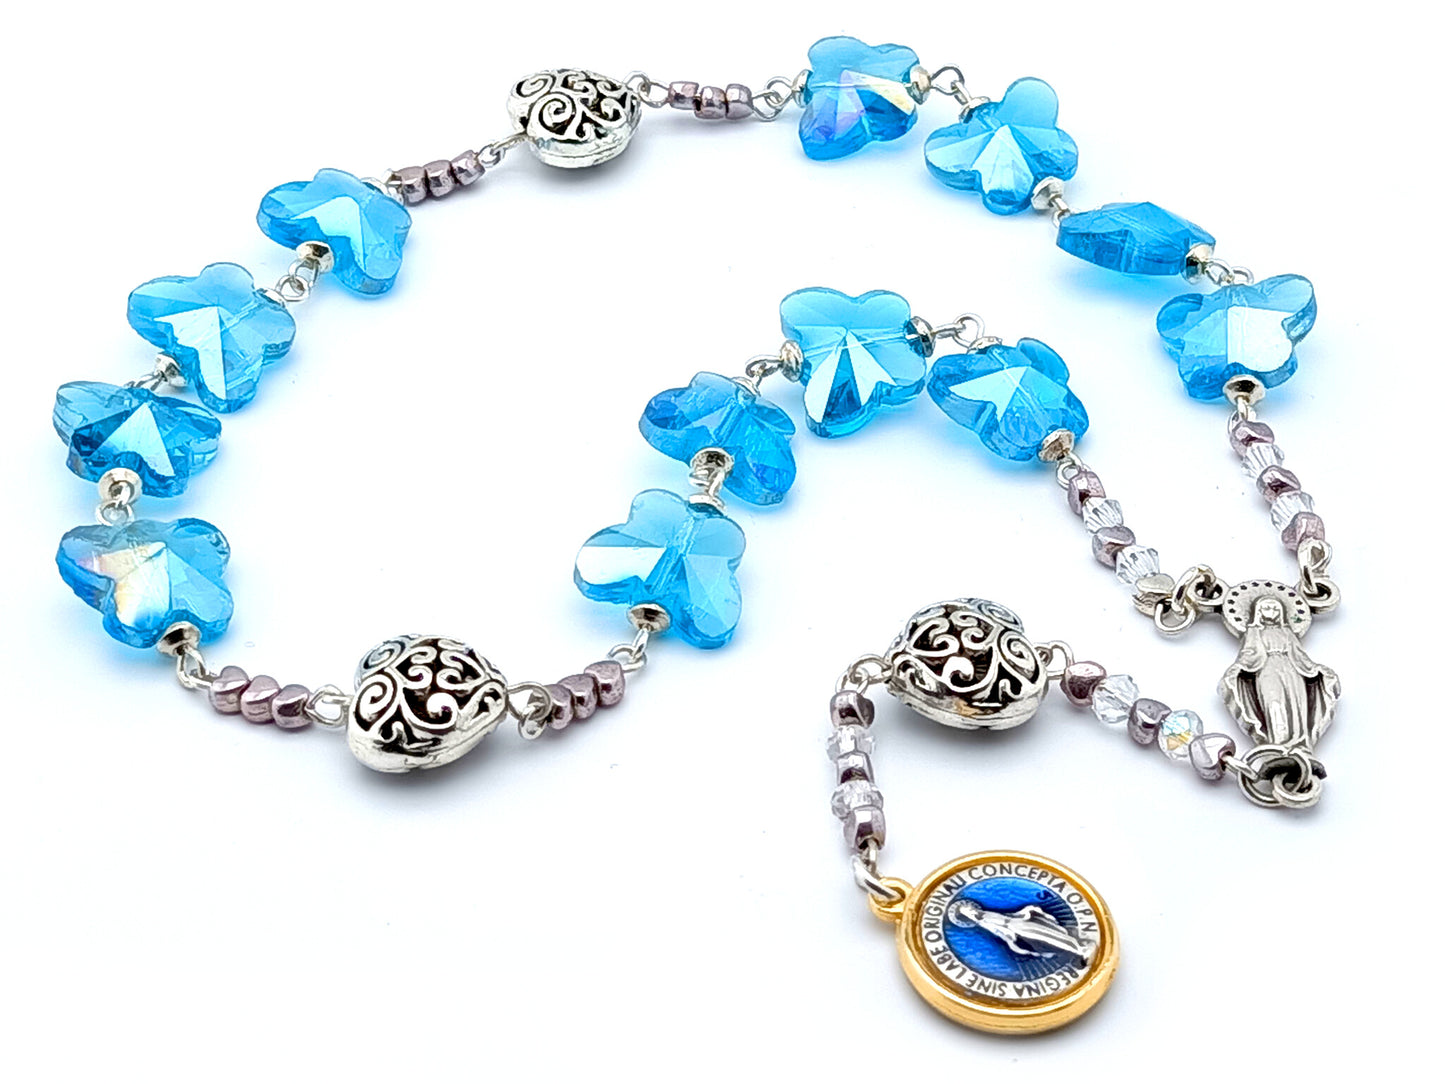 The Immaculate Conception unique rosary beads prayer chaplet with blue crystal and silver filigree heart beads, Our Lady centre medal and Miraculous medal. 